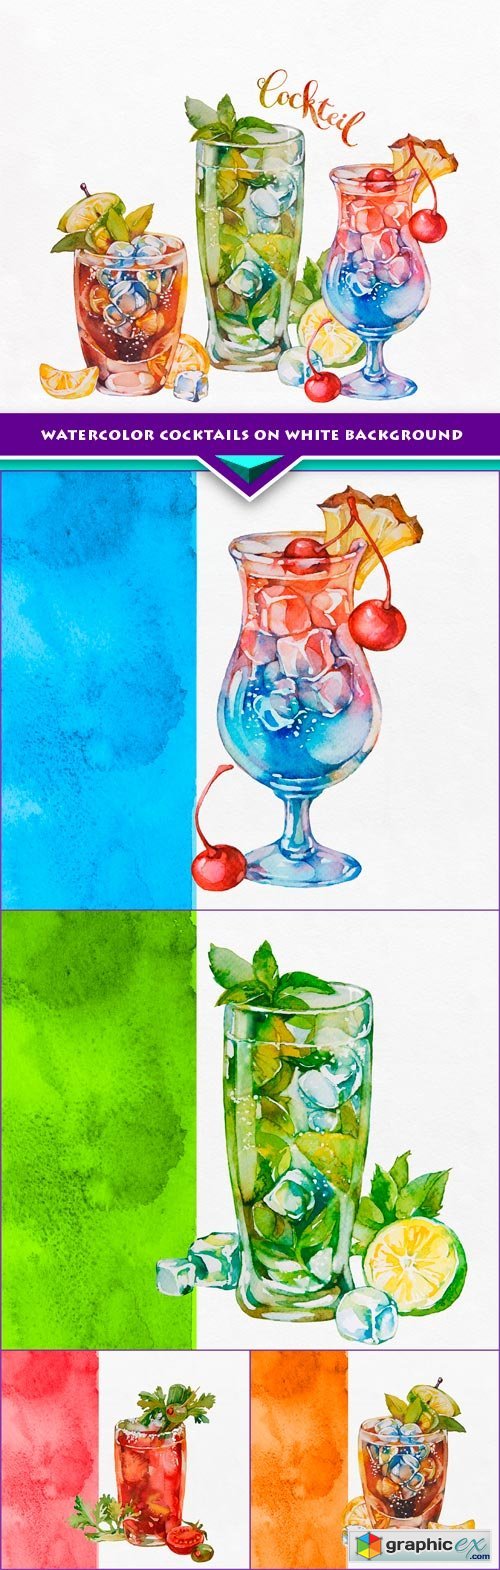 Watercolor cocktails on white background 5x EPS